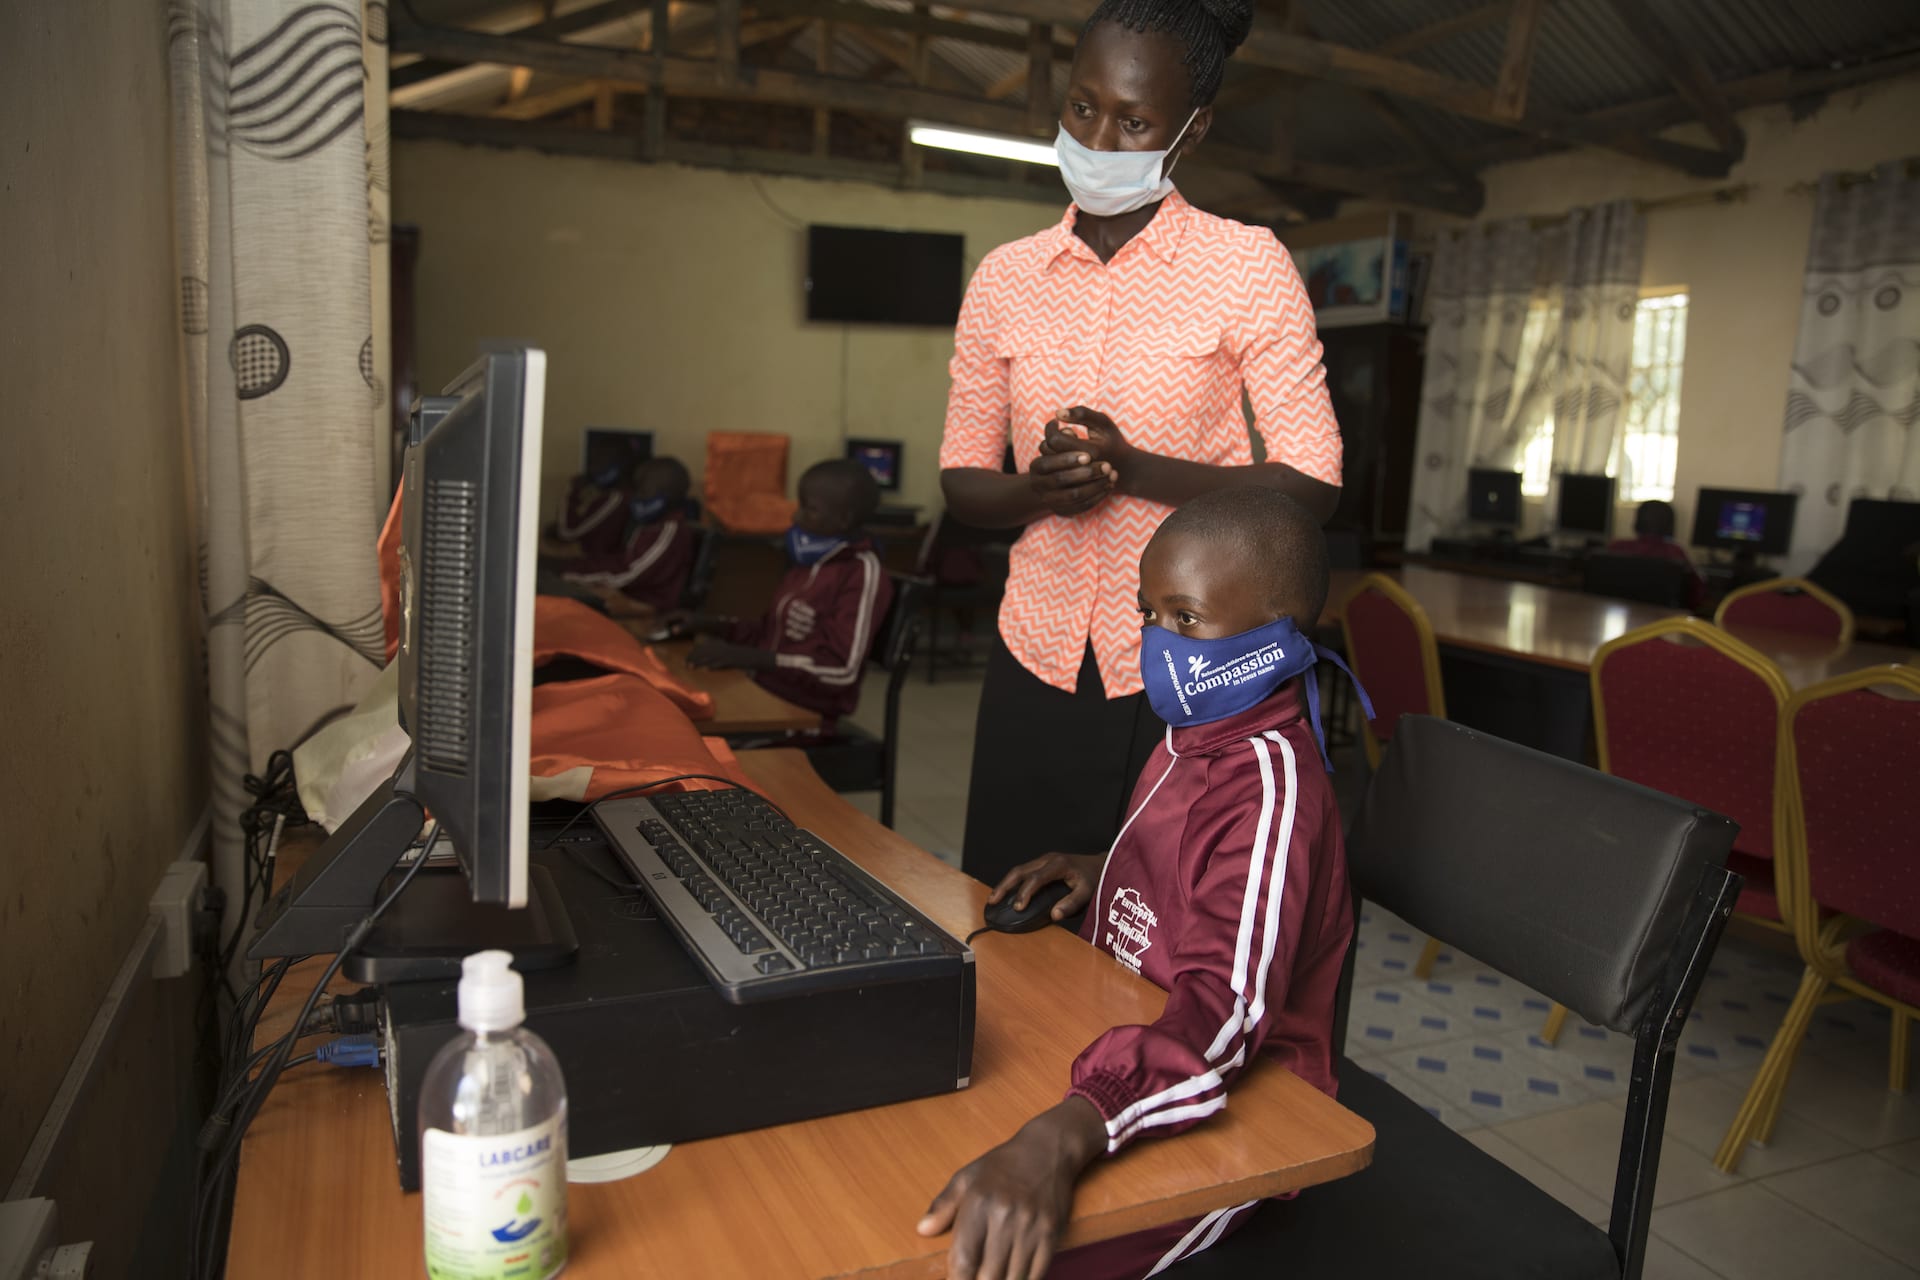 A young student works at a computer with a teacher standing behind her. Both are wearing protective face masks.